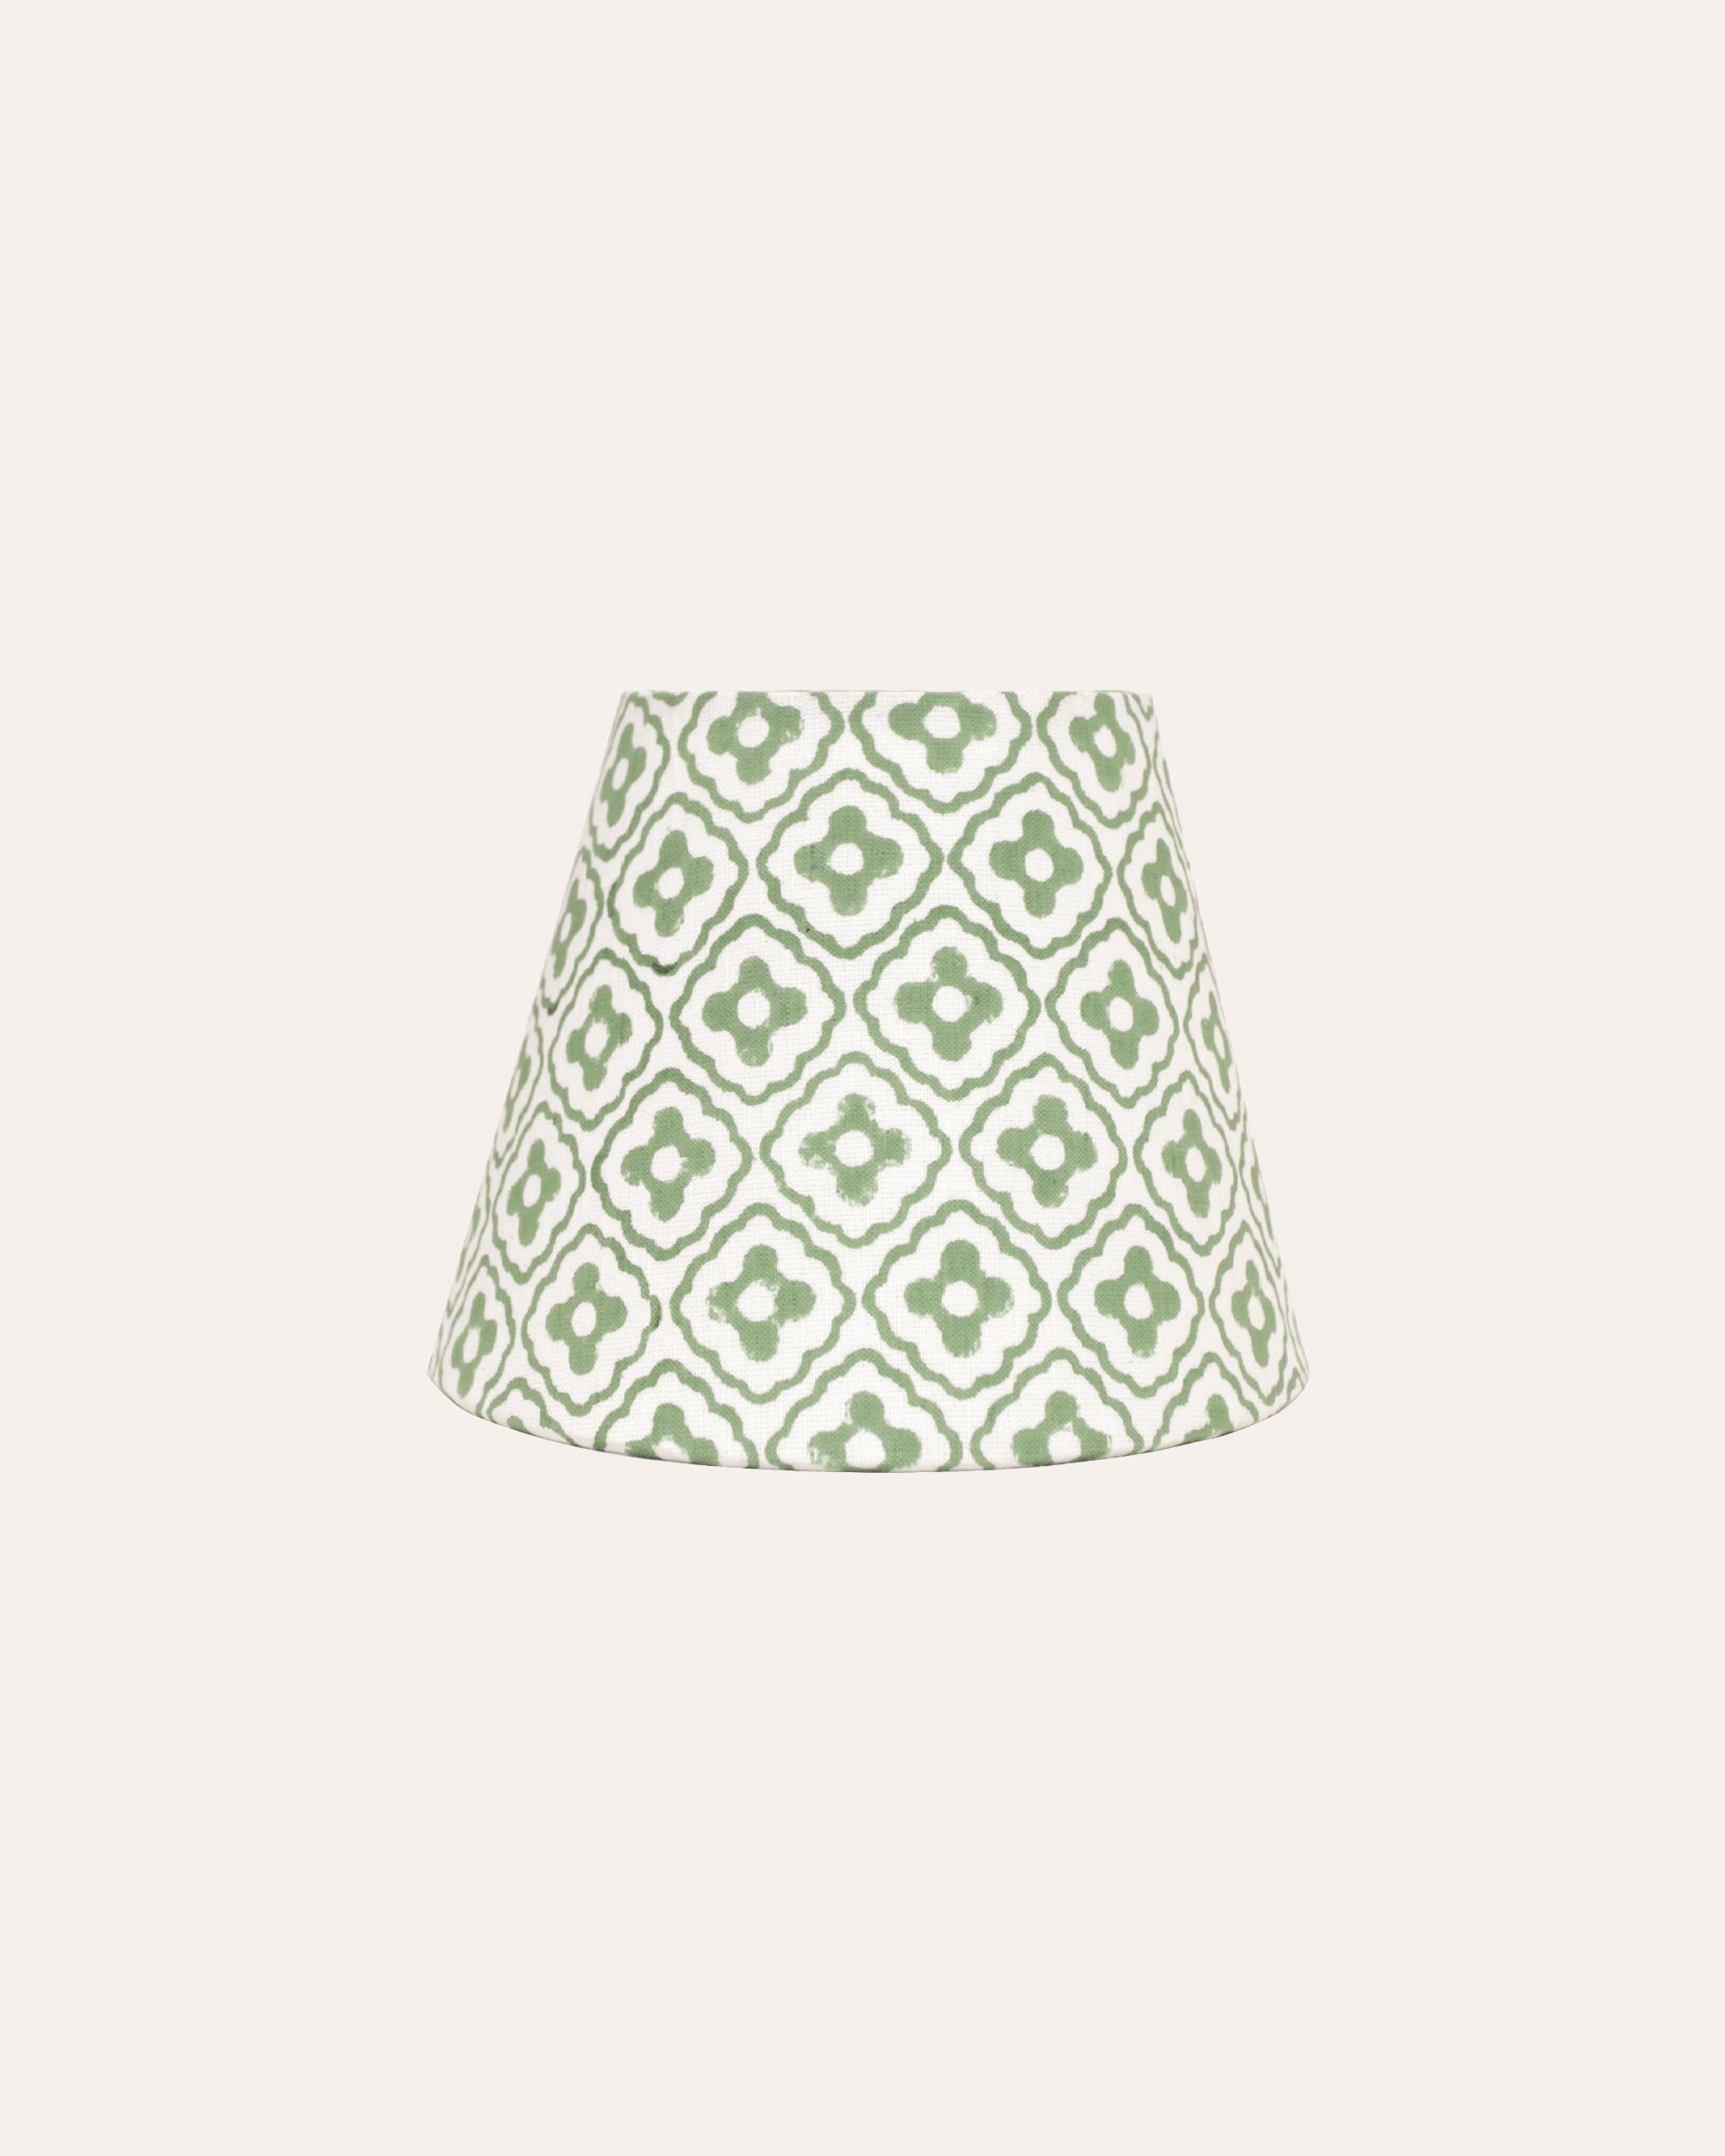 Finestra Candle Lampshade - Green